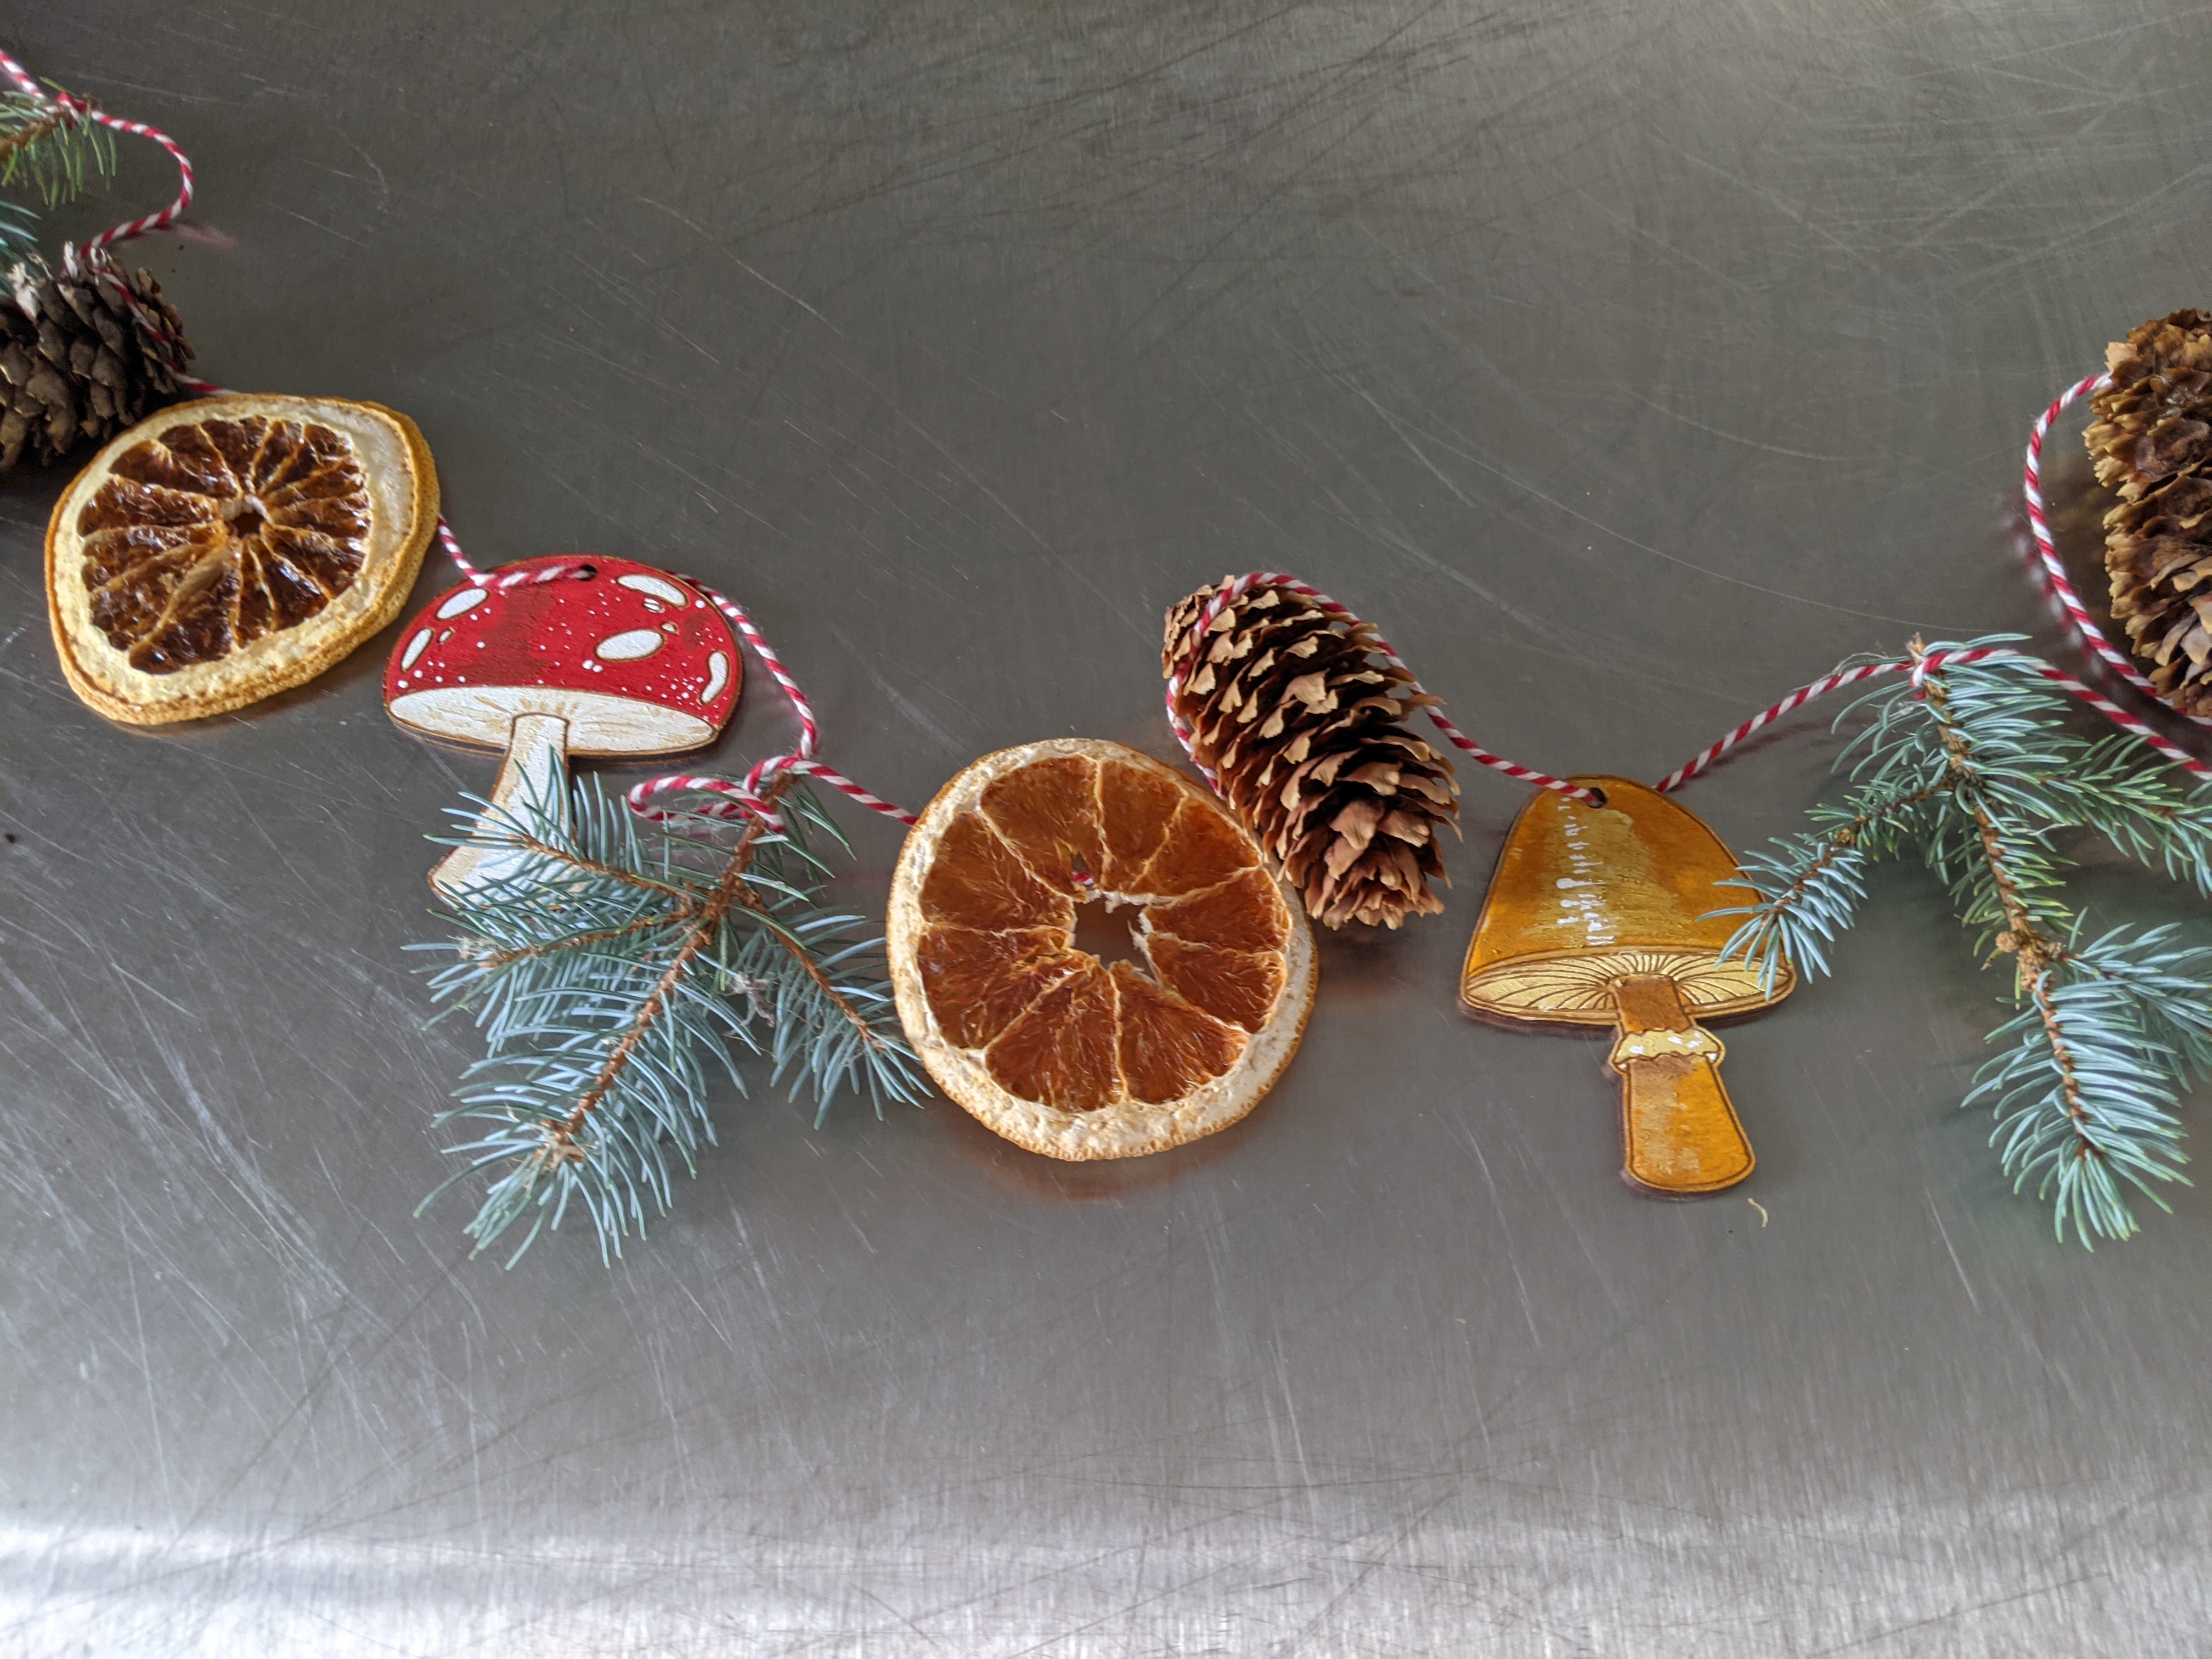 Garland made of dehydrated orange slices, pine cones, pine branches, and painted laser cut mushrooms on a metal table